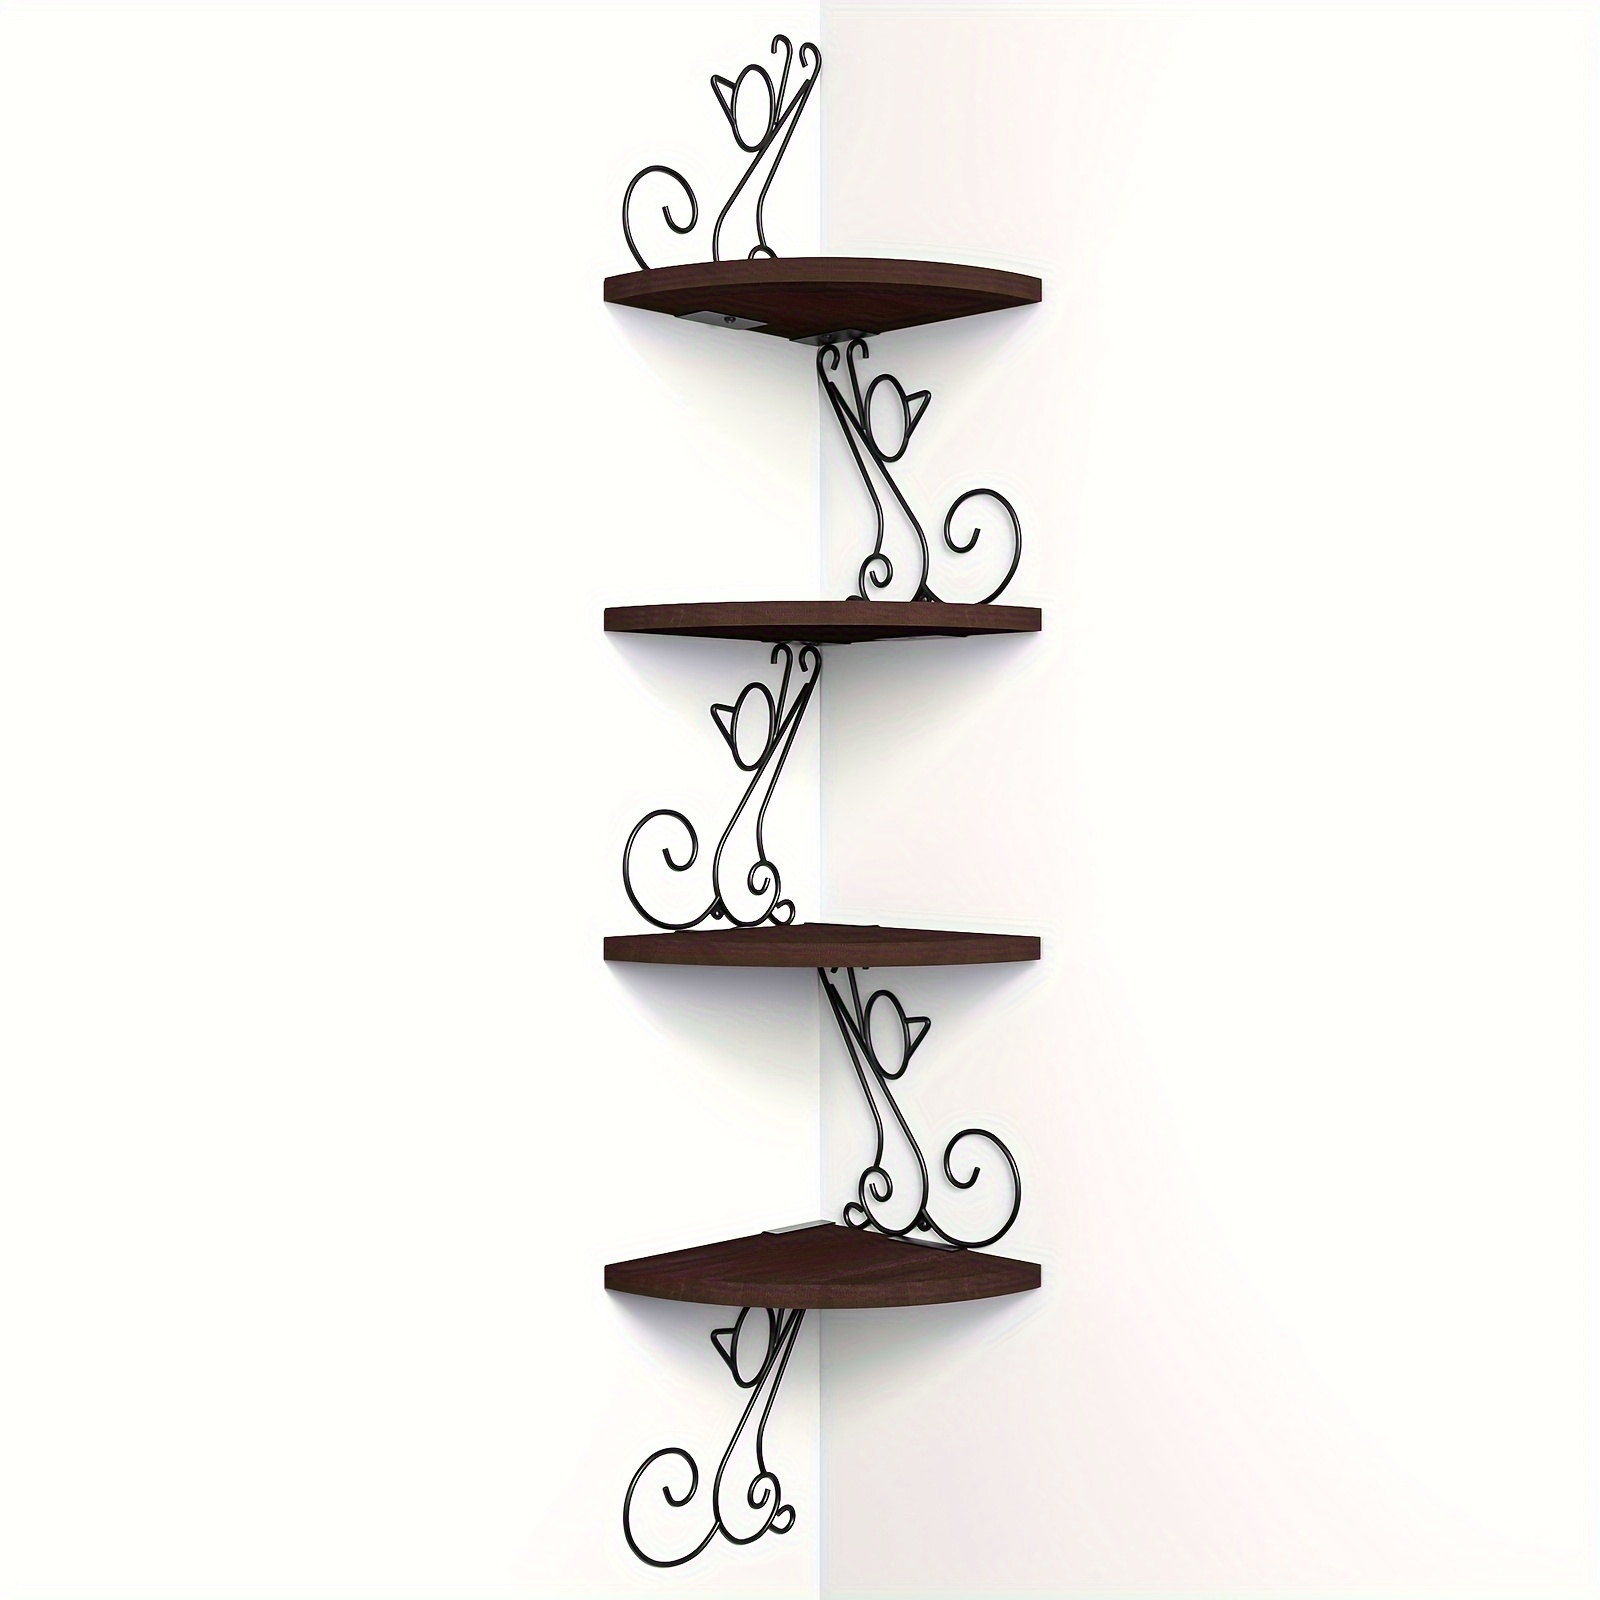 

Corner Shelf Wall Mount, 4 Tier Floating Shelves For Wall, Easy-to-assemble Wall Shelves Rustic Wood Decor For Bedroom Living Room Bathroom Kitchen Office, Walnut Finish